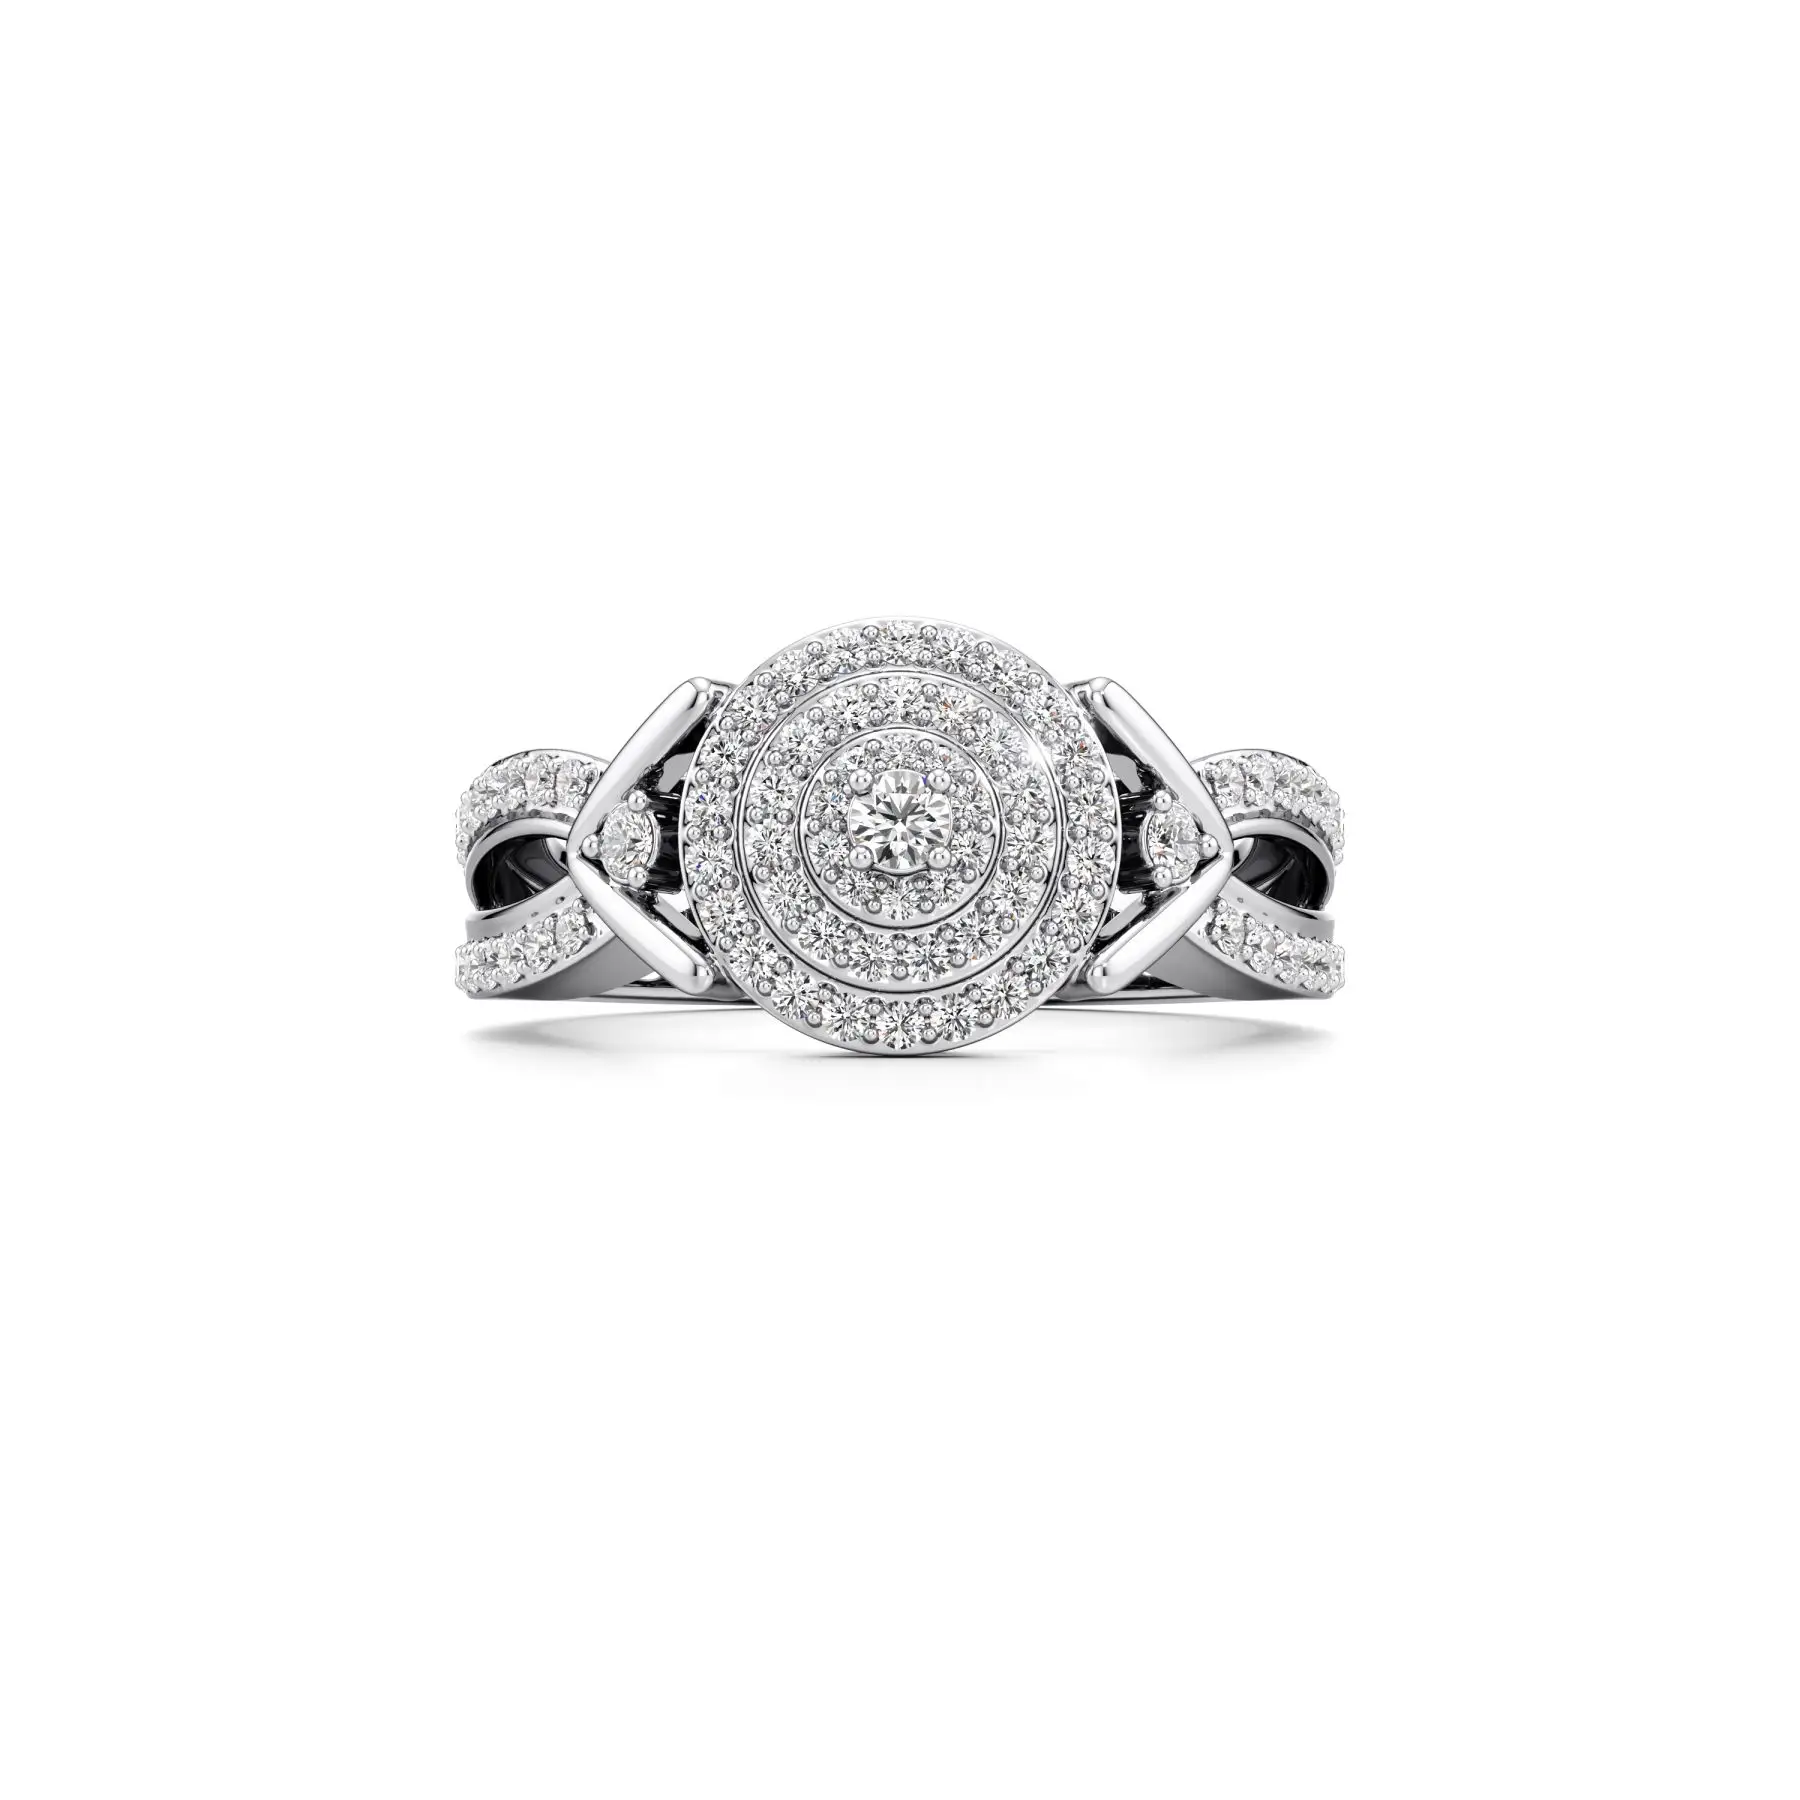 Crowned Blingy Diamond Ring in White 10k Gold